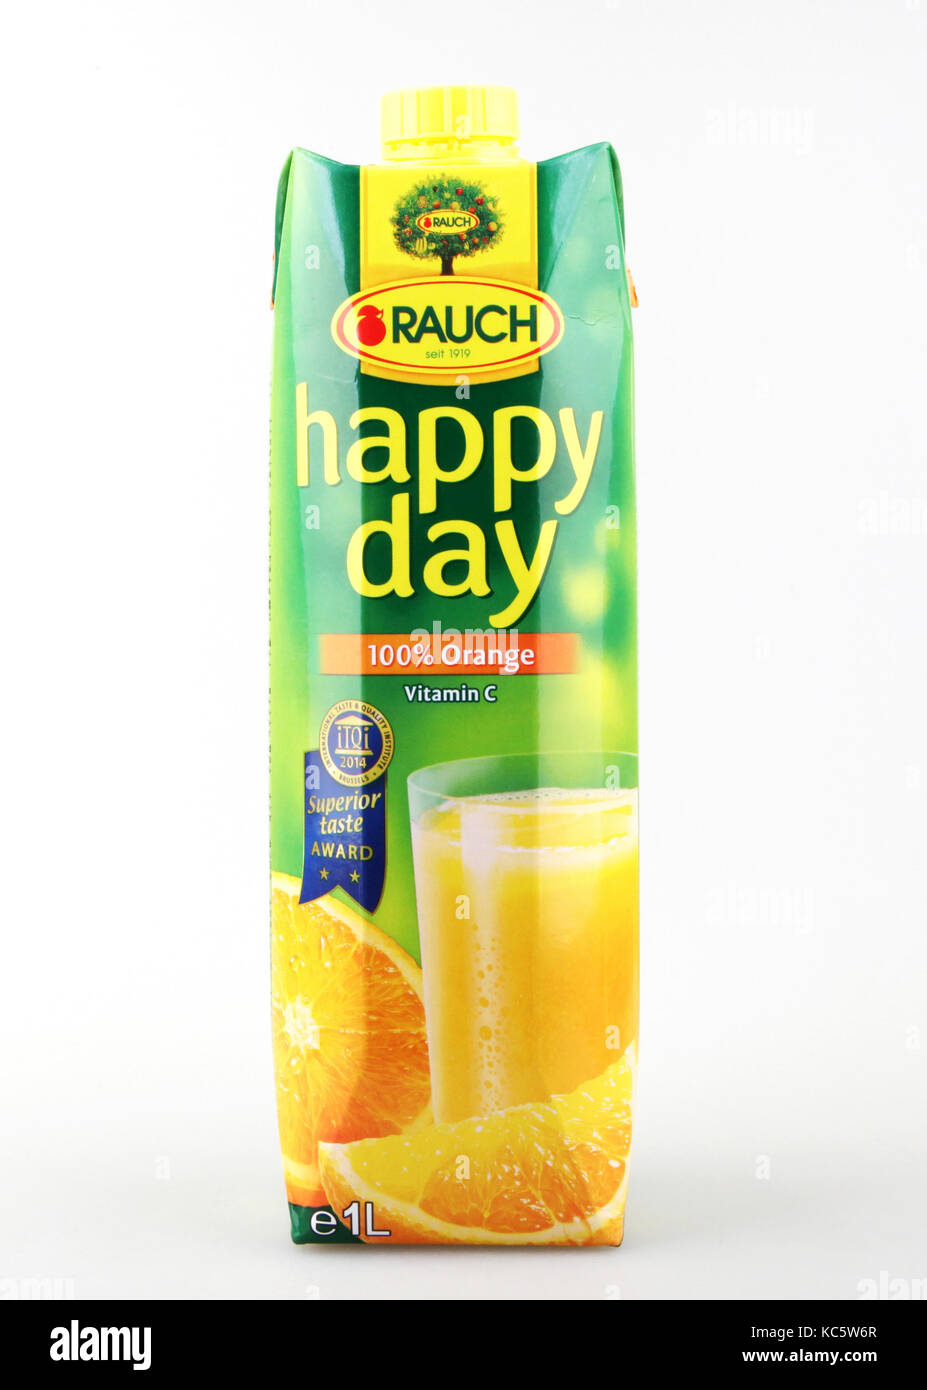 Pomorie, Bulgaria - October 03, 2017: Natural Fruit Juice Rauch. Rauch is an Austrian beverage company based in Rankweil. It was founded in 1919. Stock Photo